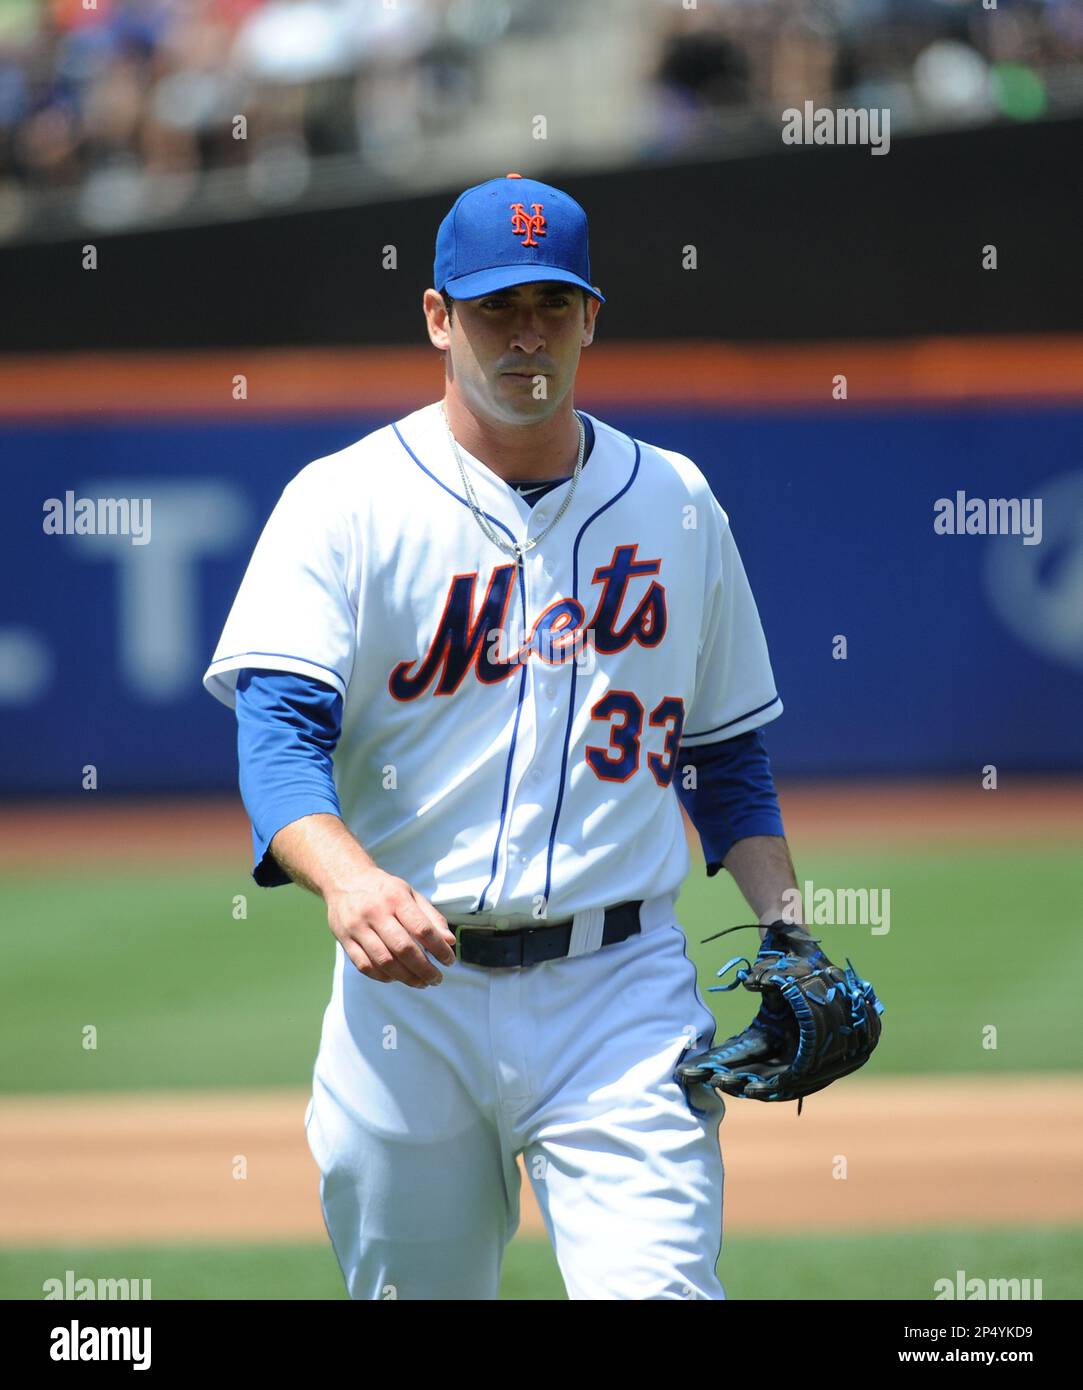 New York Mets pitcher Matt Harvey (28) during game against the Philadelphia  Phillies at Citi Field in Queens, New York; July 21, 2013. Mets defeated  Phillies 5-0. (AP Photo/Tomasso DeRosa Stock Photo - Alamy